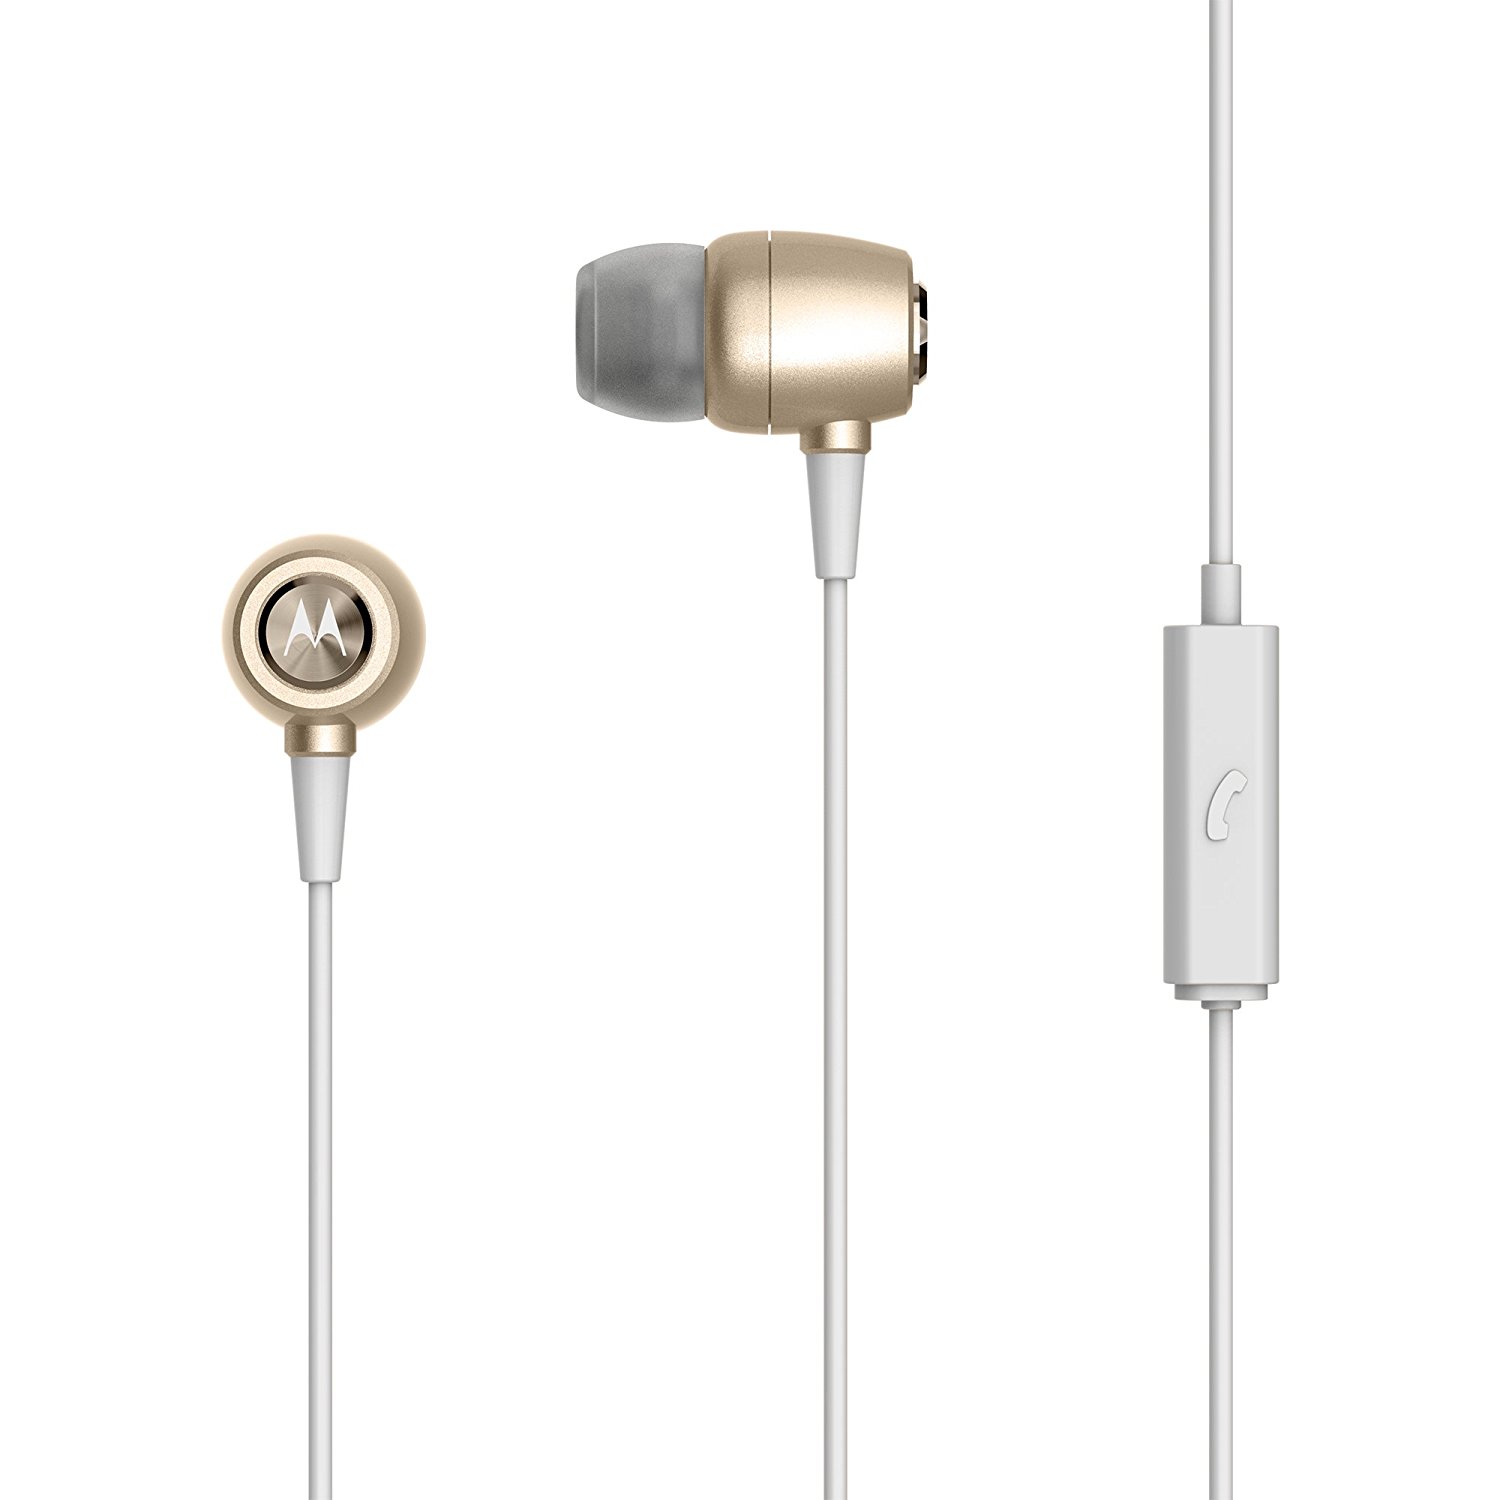 Motorola Earbuds Metal is available in Amazon 1